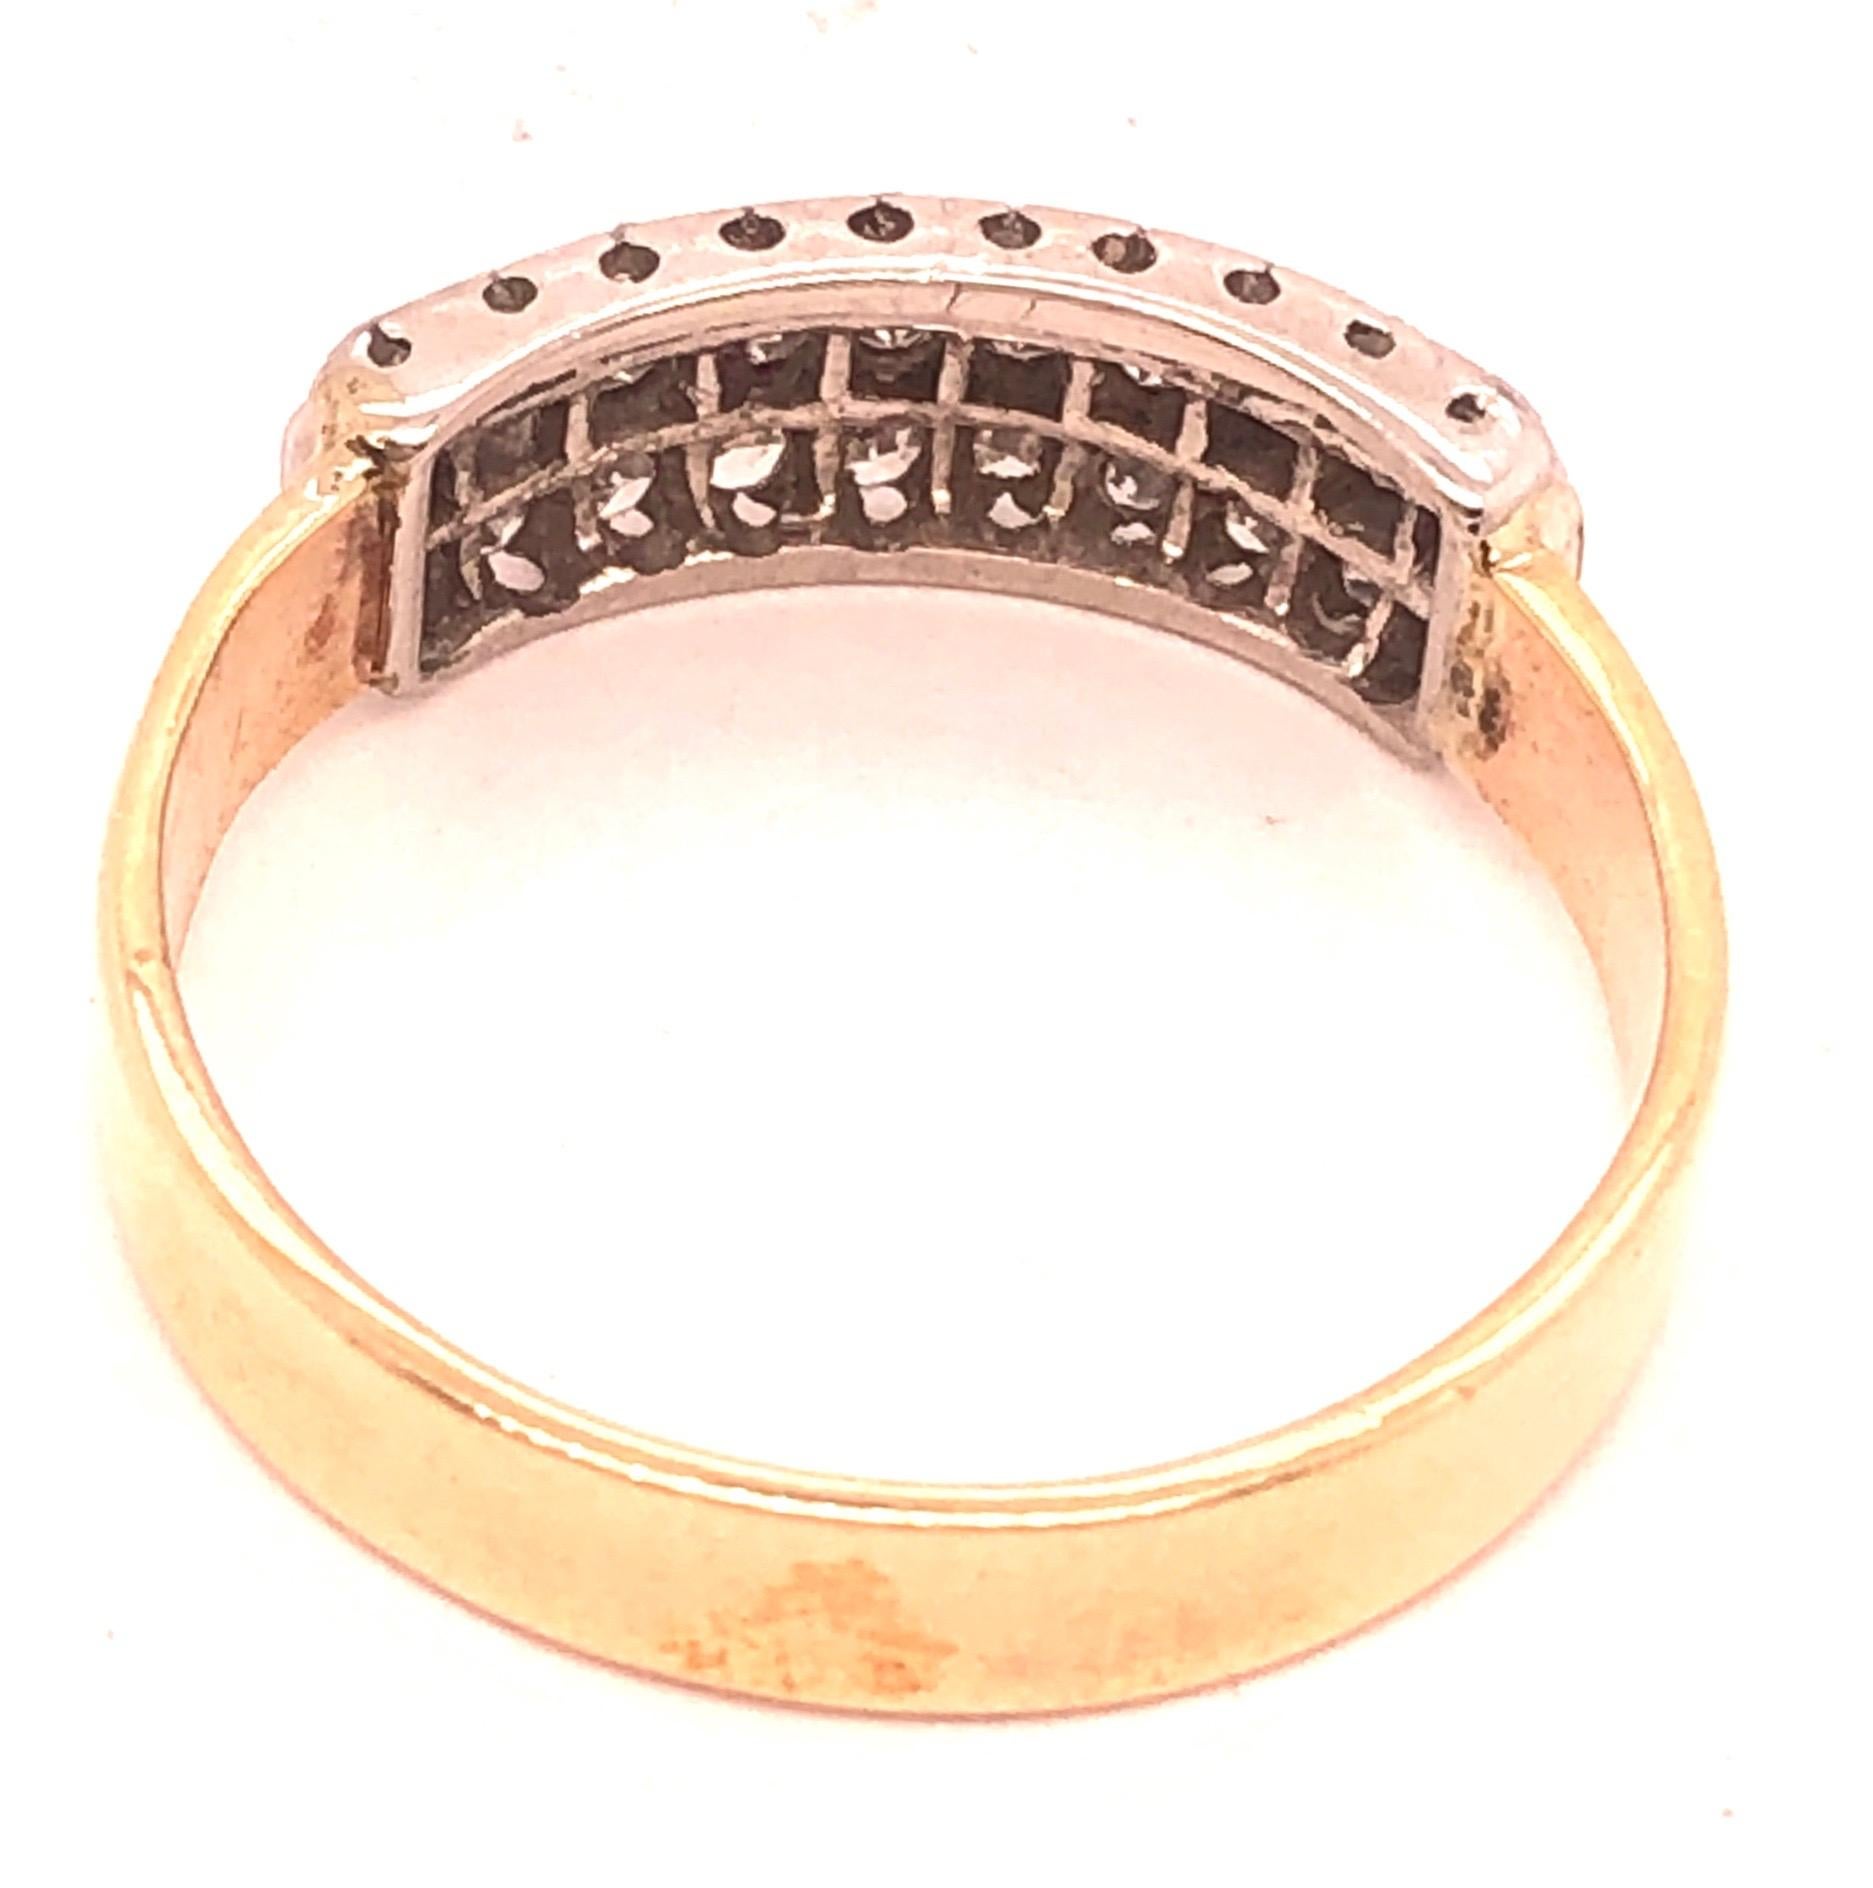 14 Karat Two-Toned Gold Ring with Diamonds, Wedding Band For Sale 1